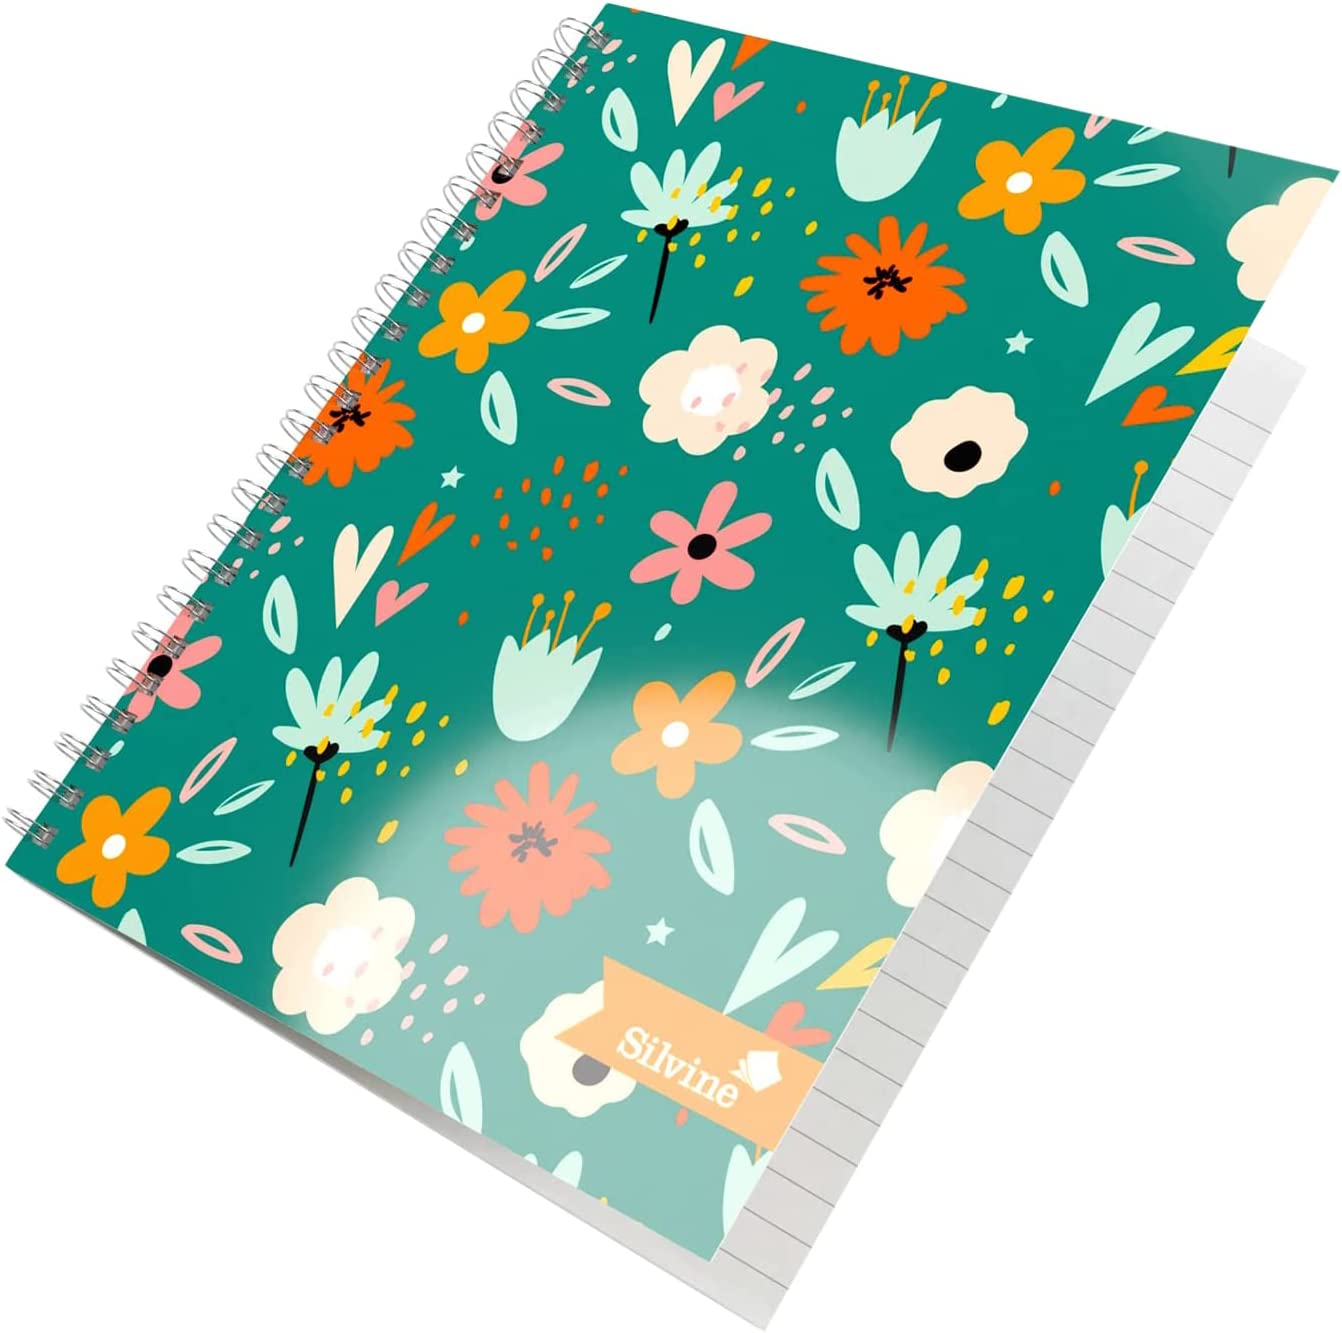 Silvine A5 Twinwire Marlene West Floral Green Notebook 160 Pages RRP 3.86 CLEARANCE XL 1.50